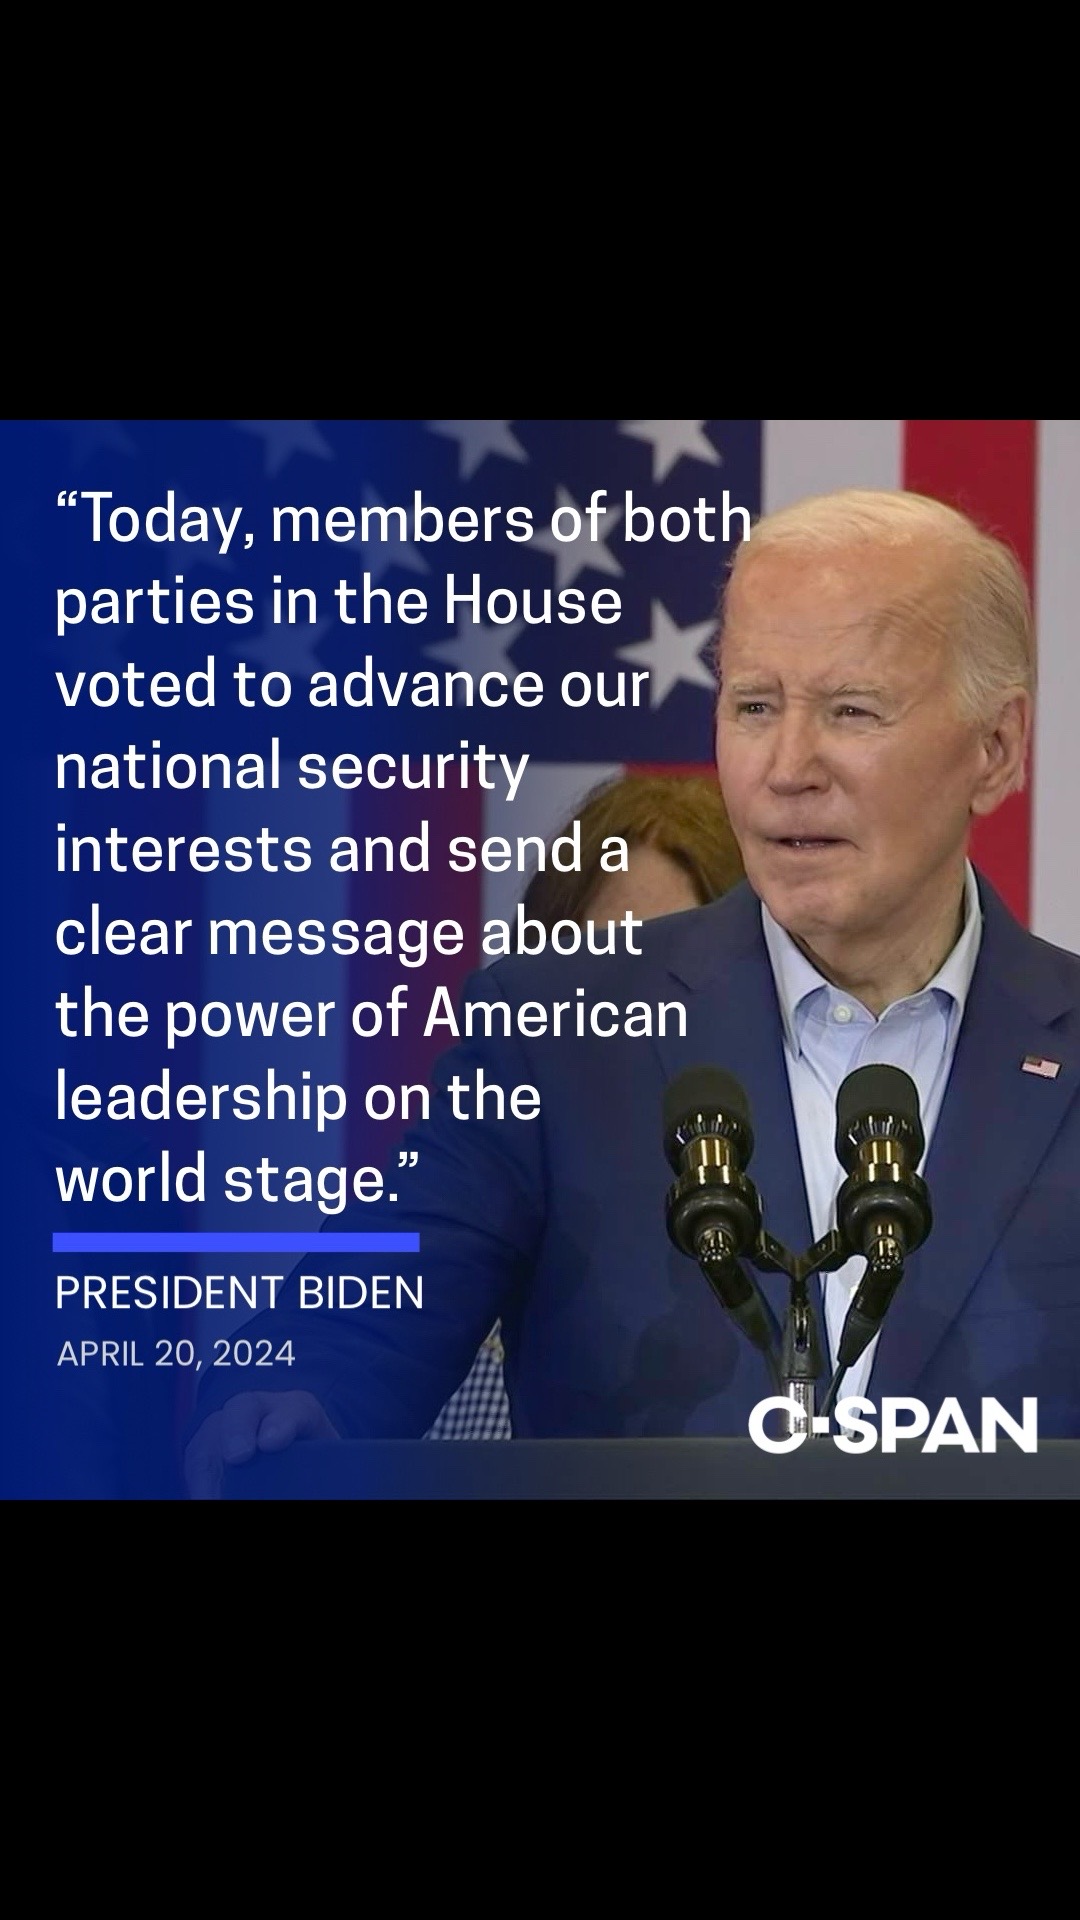 President Biden released the following statement after the House approved a $95 billion foreign aid package on Saturday, with large bipartisan majorities voting to provide support to Ukraine, Israel and the Indo-Pacific.   "Today, members of both parties in the House voted to advance our national security interests and send a clear message about the power of American leadership on the world stage. At this critical inflection point, they came together to answer history’s call, passing urgently-needed national security legislation that I have fought for months to secure. "This package will deliver critical support to Israel and Ukraine; provide desperately needed humanitarian aid to Gaza, Suda